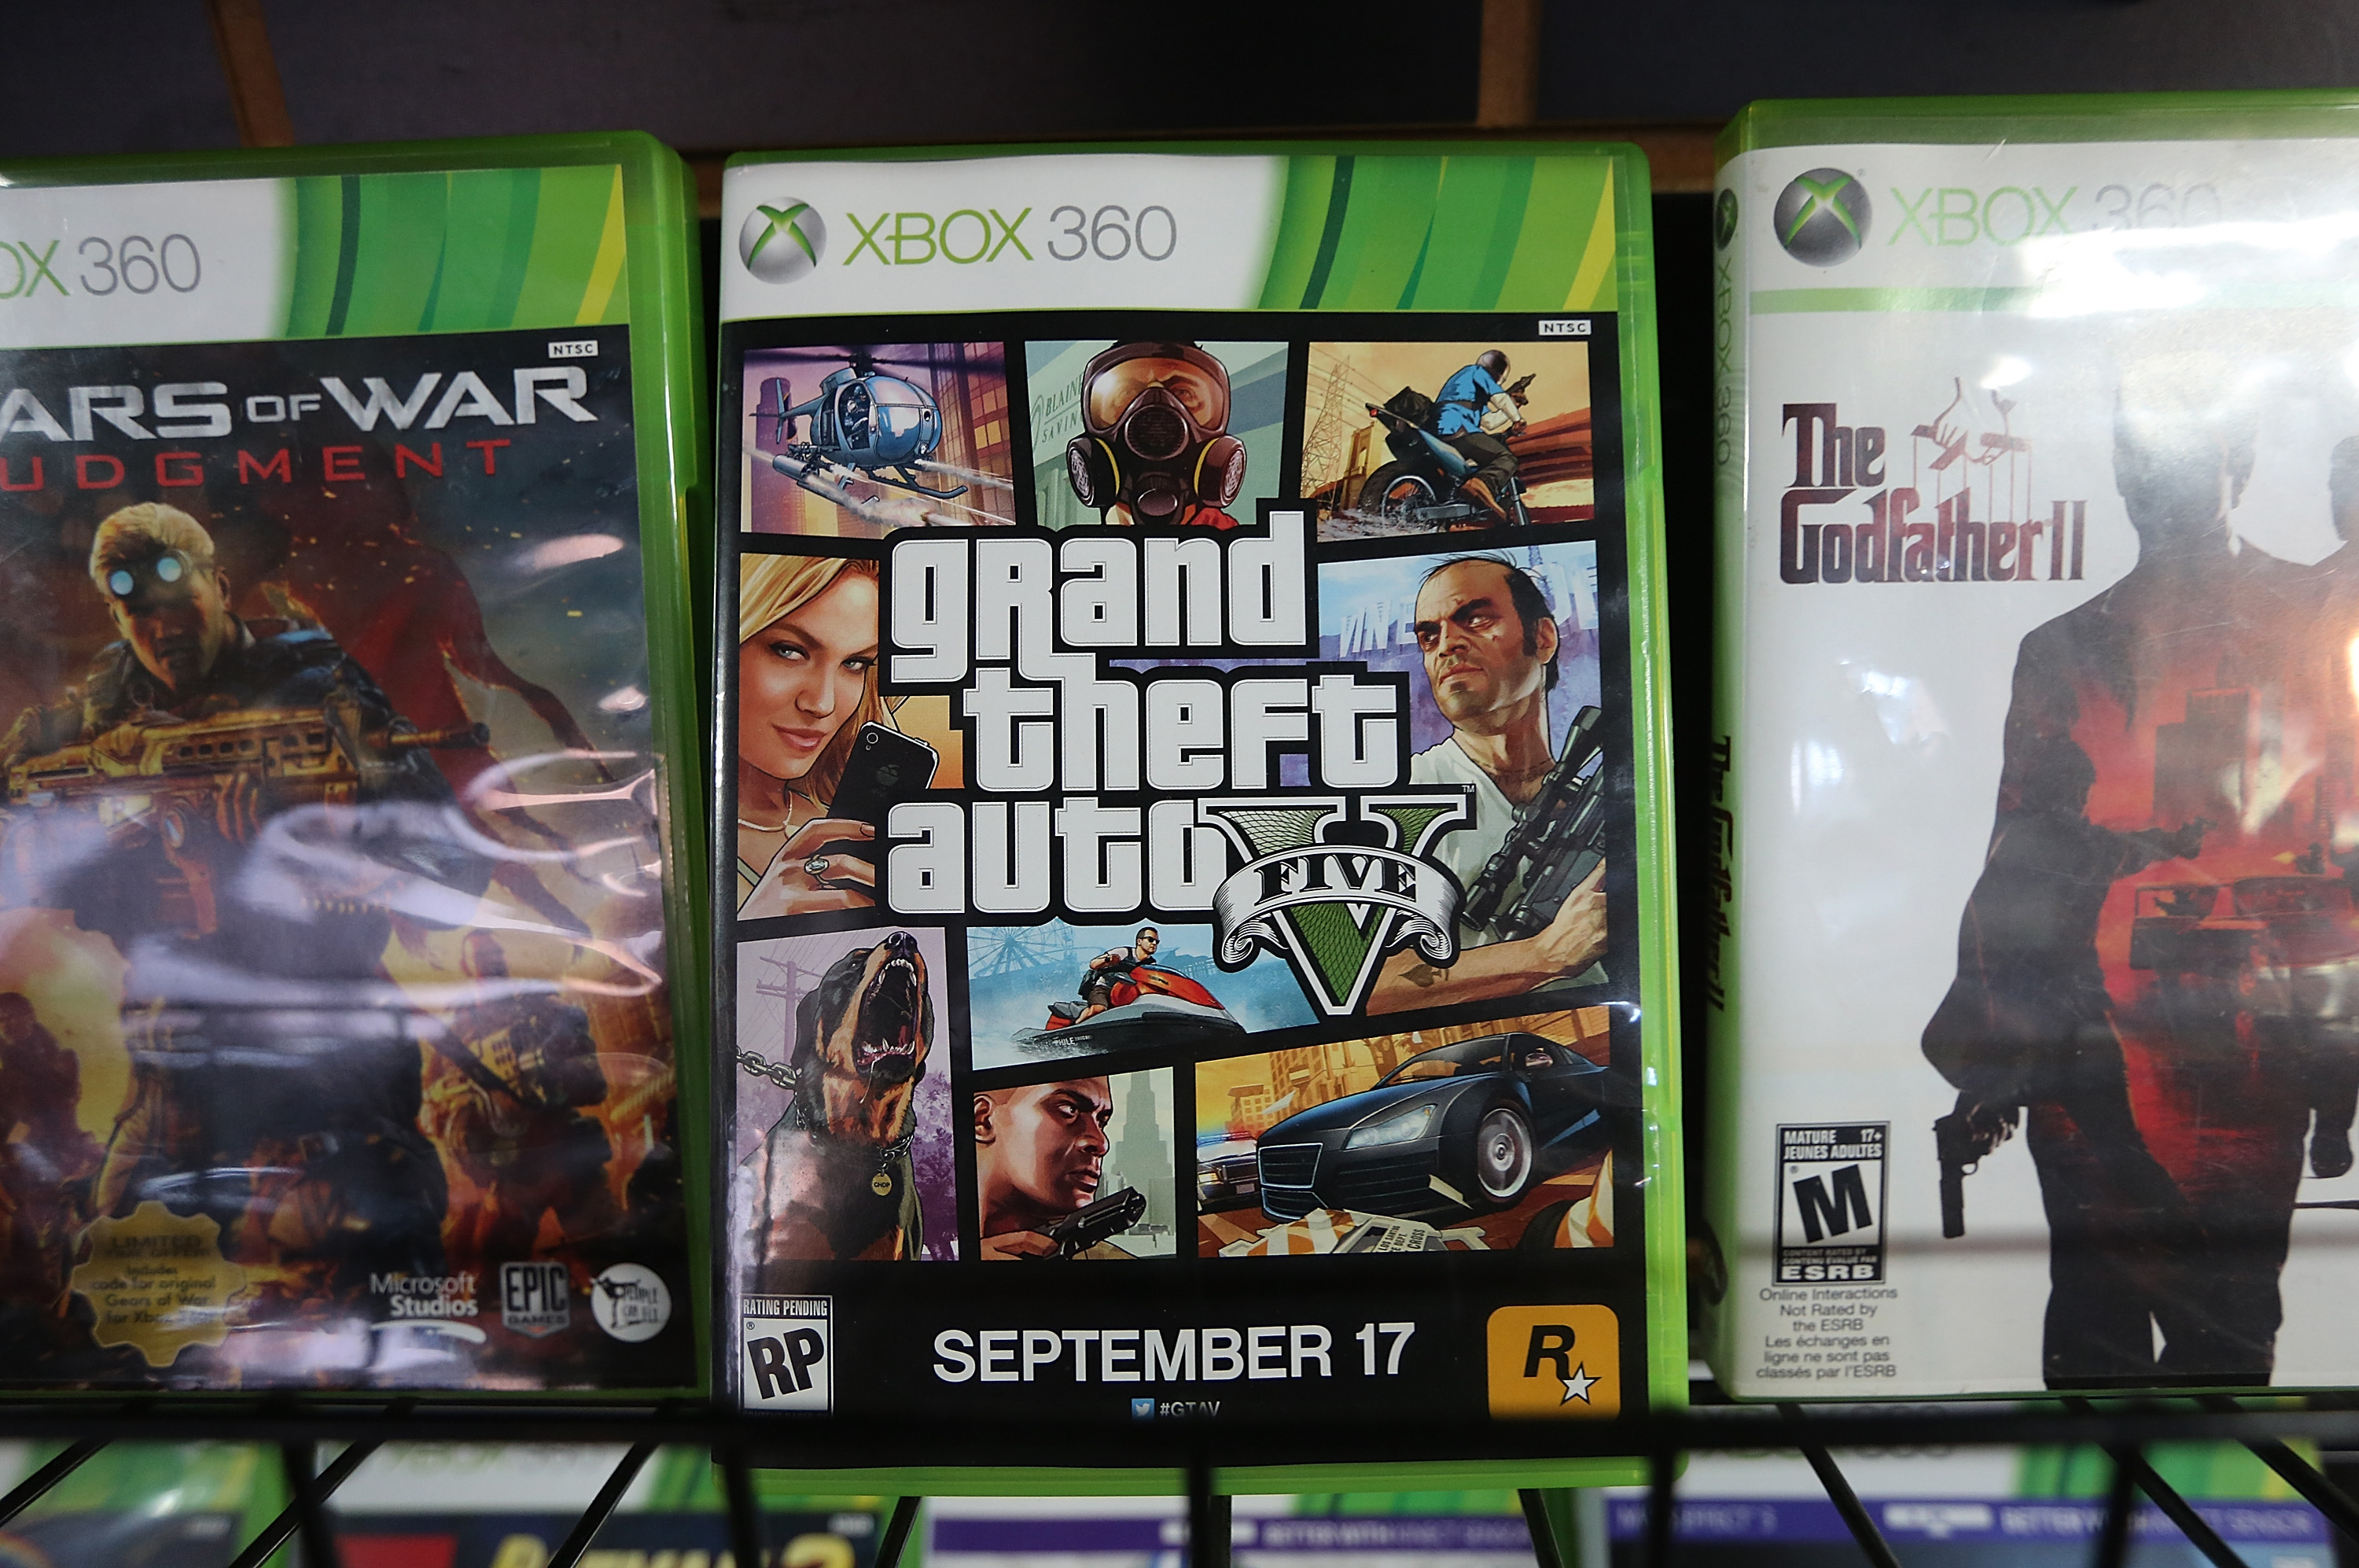 A display copy of Grand Theft Auto V sits on a shelf at the 8 Bit &amp; Up video games shop in New York City on Sept. 18, 2013. (Mario Tama&mdash;Getty Images)